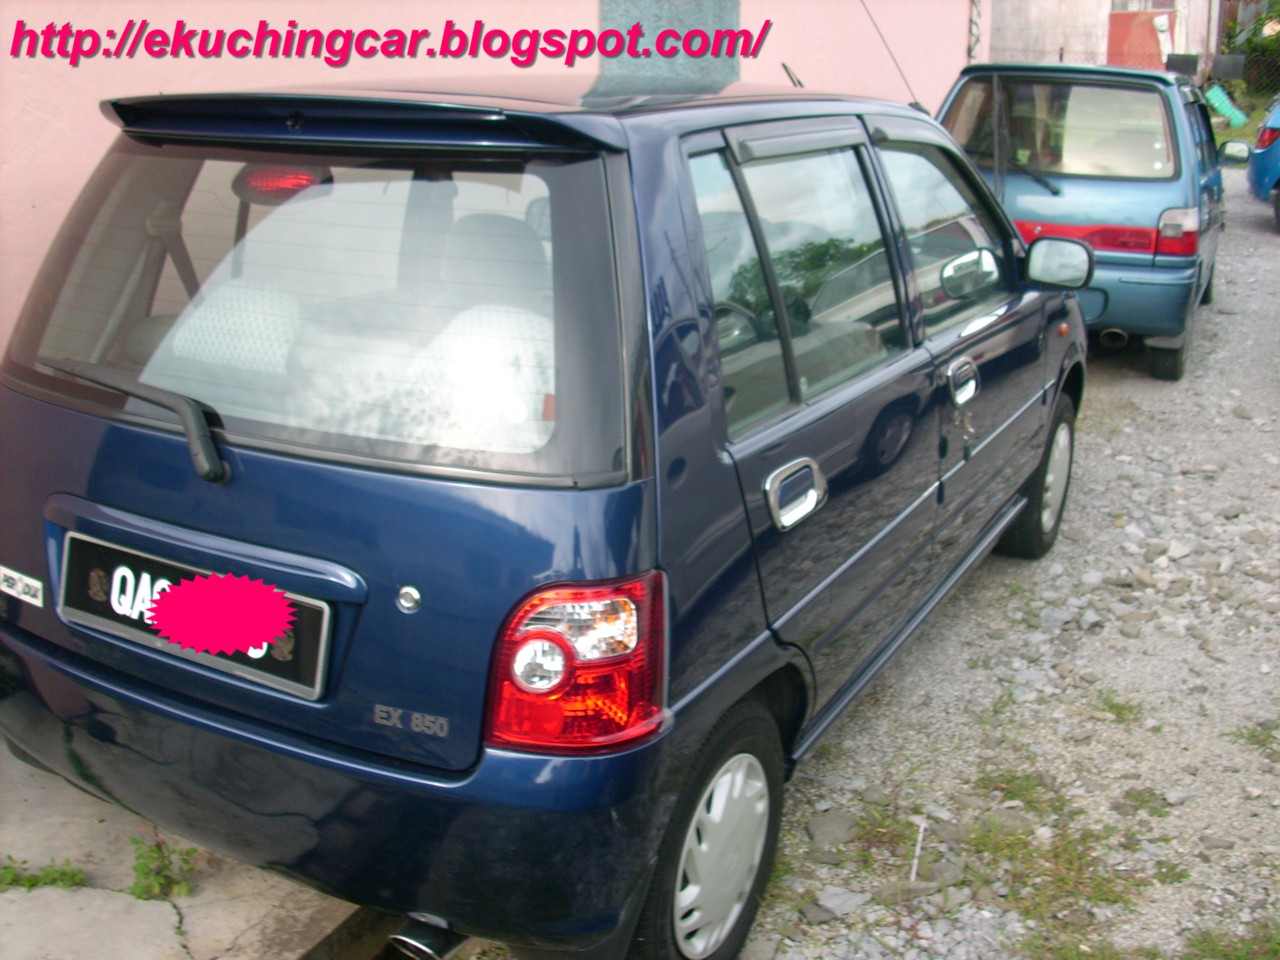 Kuching Use Car For Sale, Buy, Sell: Kancil 850EX